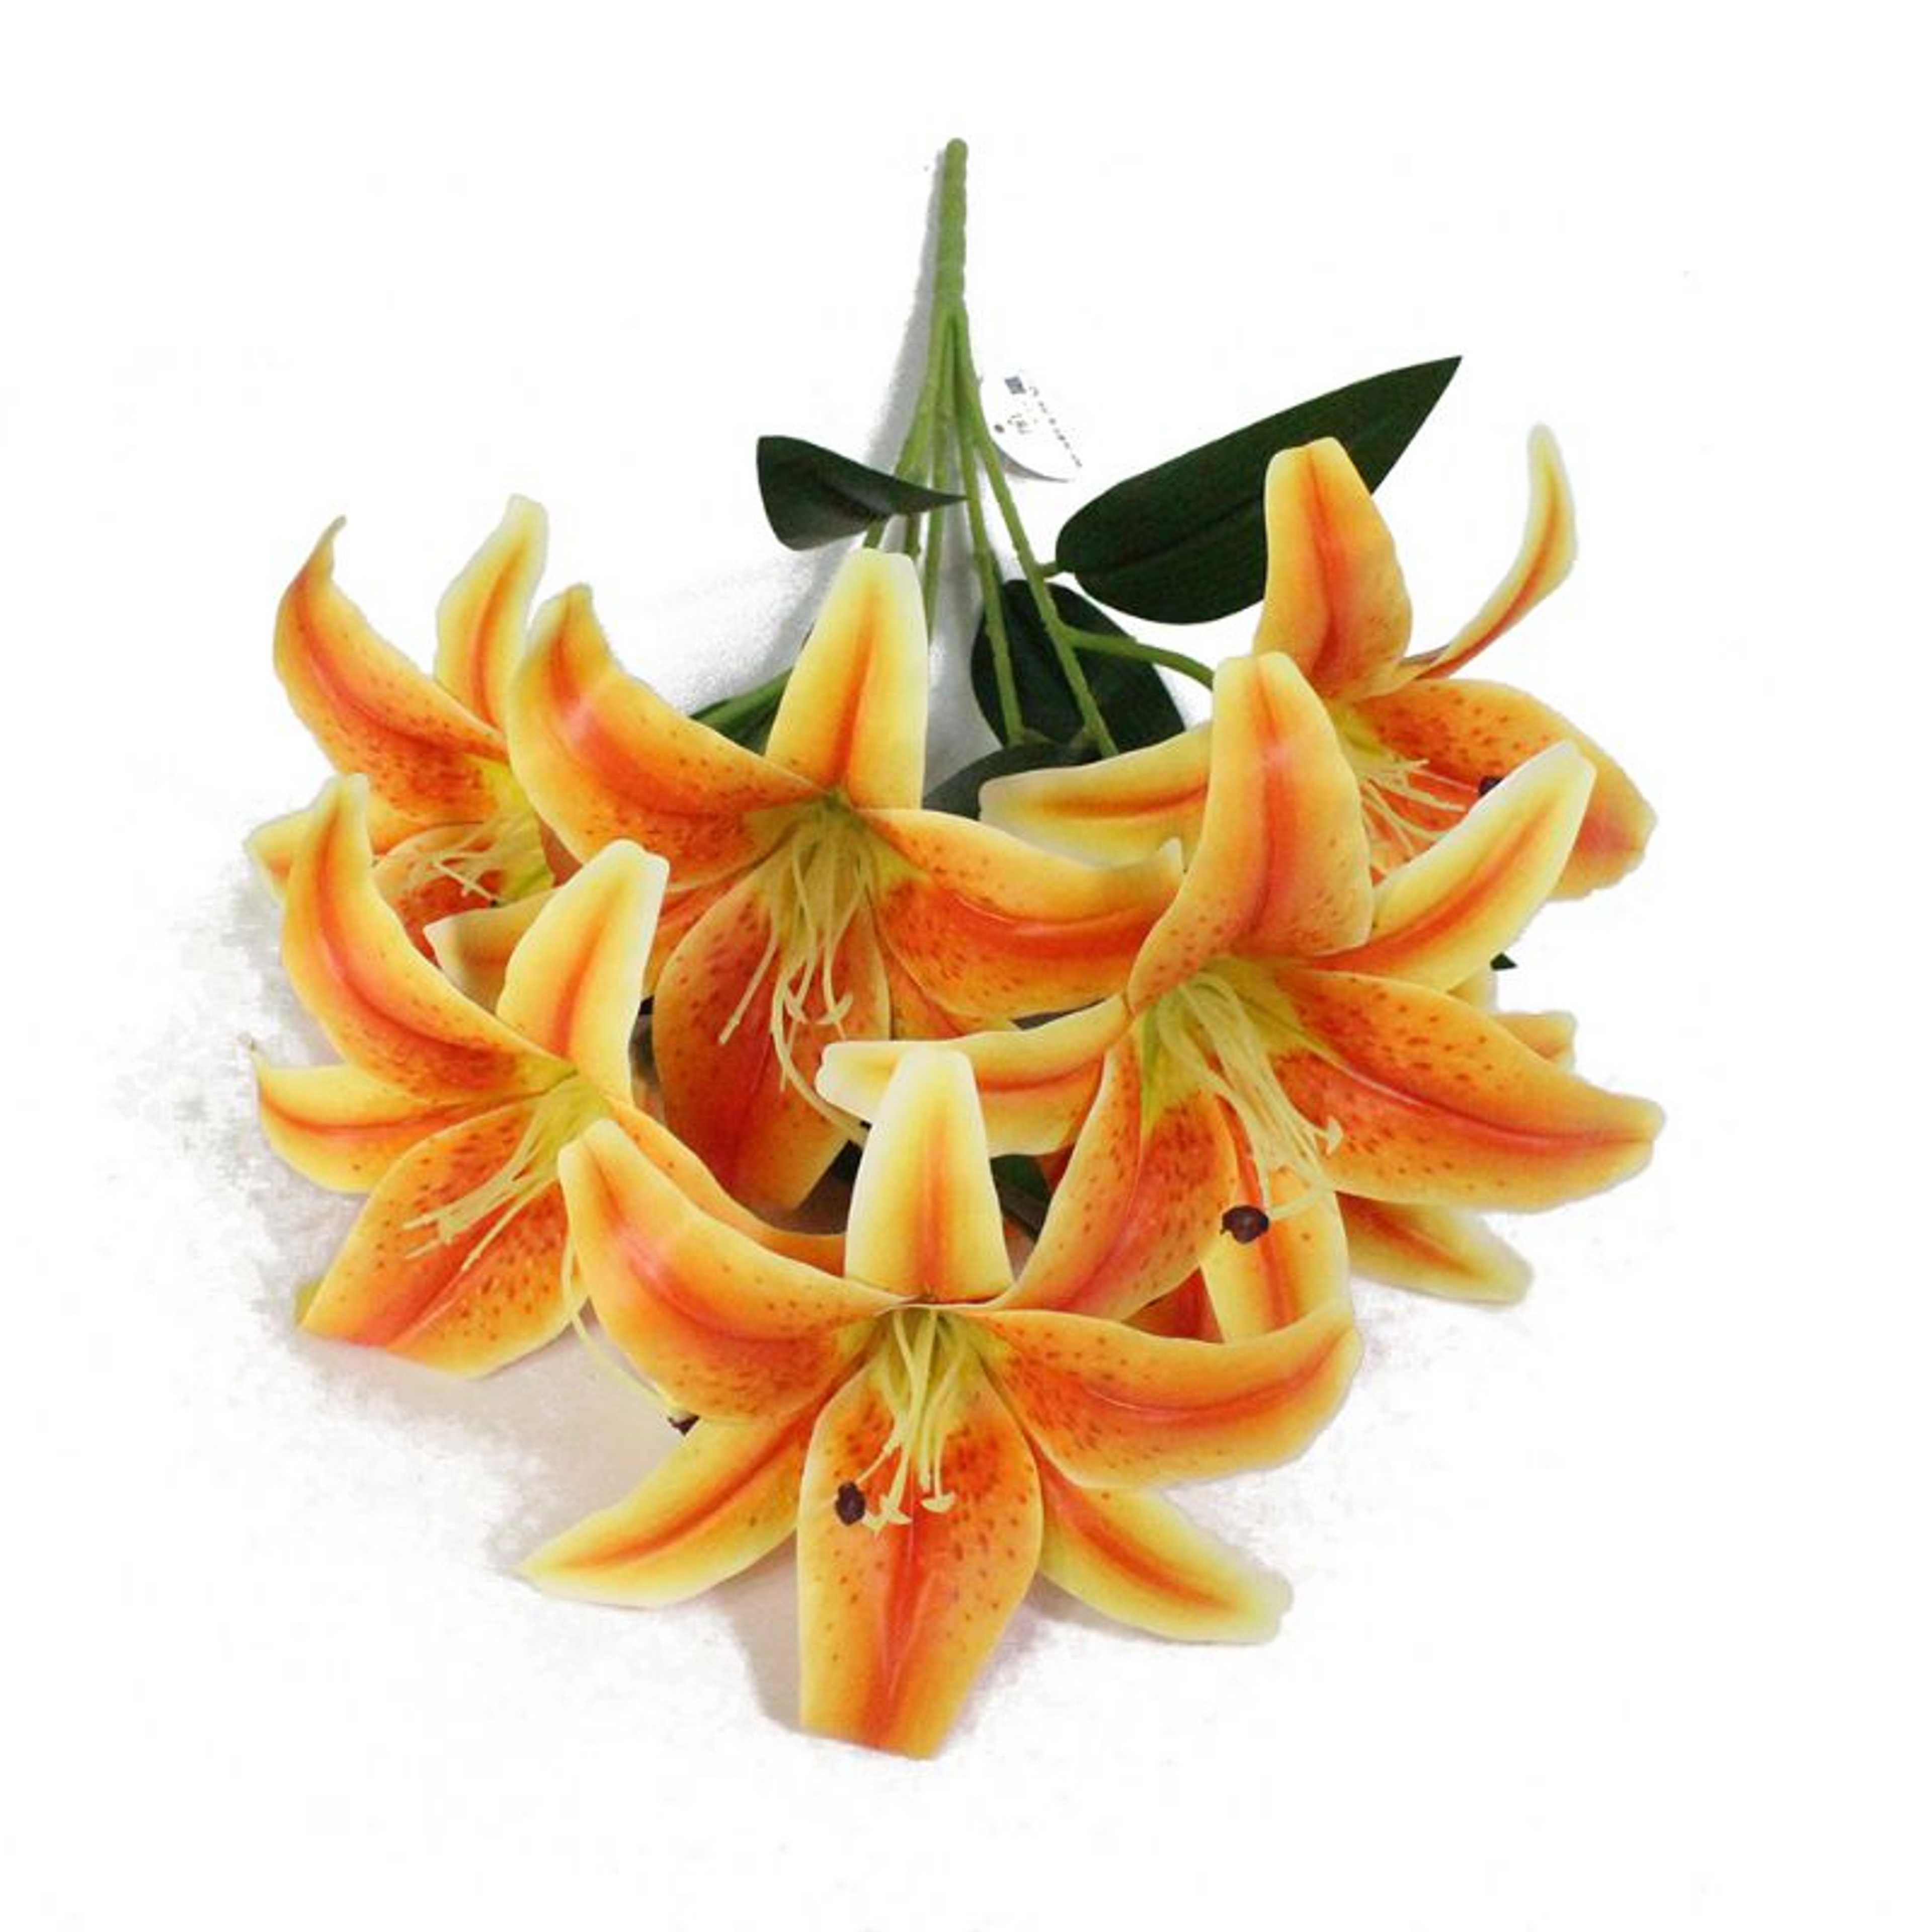 Bunch of 9 - Artificial Star Lilly Flowers for Home & Office Decor, Tigerr Lilly Flowers, Oriented Lilly Flowers, Full Bloom Fakee Latex Real Touch Artificial Flower